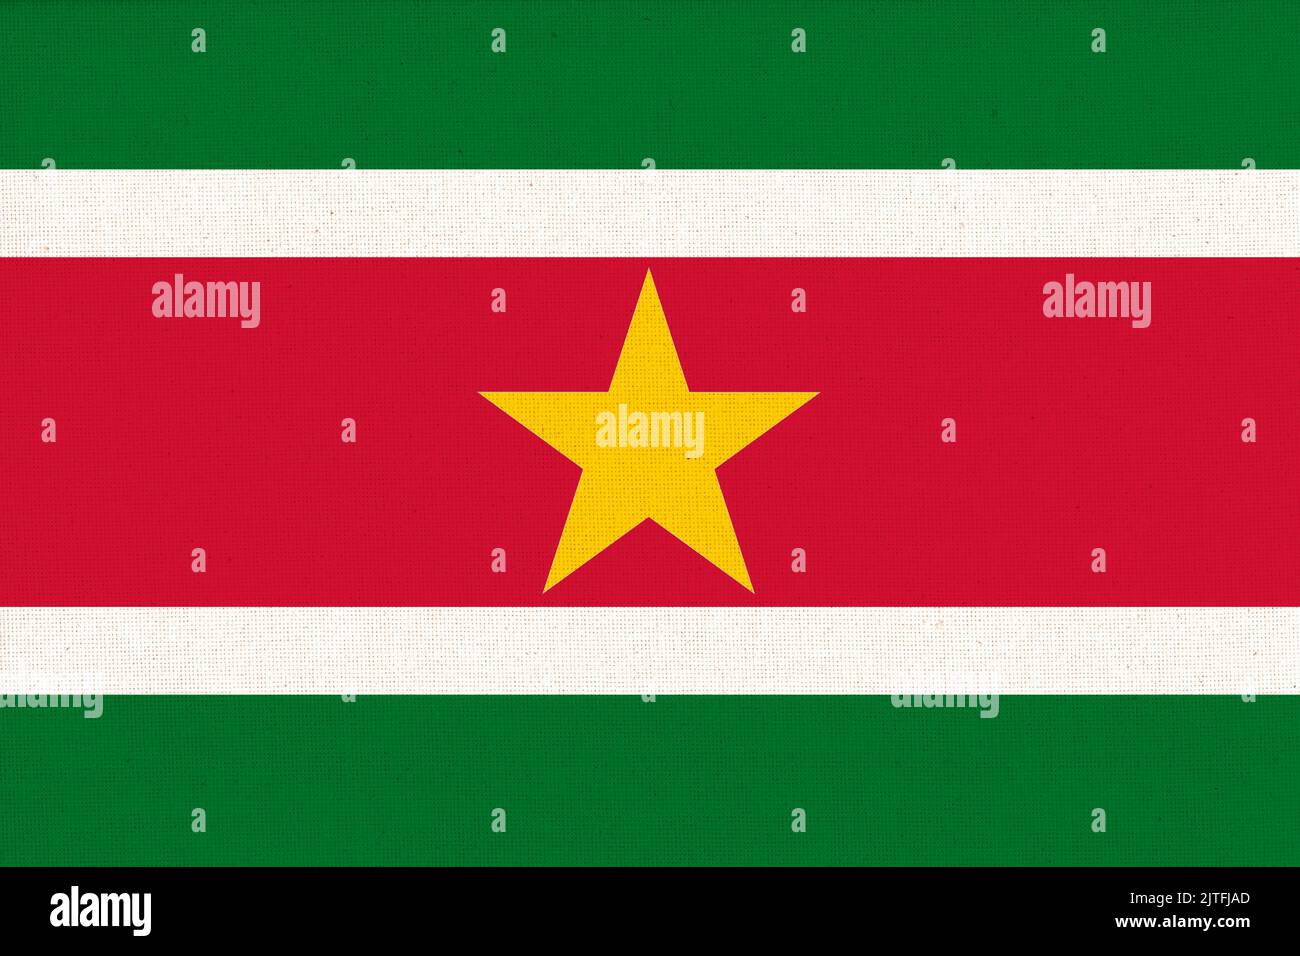 Flag of Suriname. Surinamese flag on fabric surface. Fabric Texture. National symbol. Republic of Suriname. Surinamese national flag Stock Photo